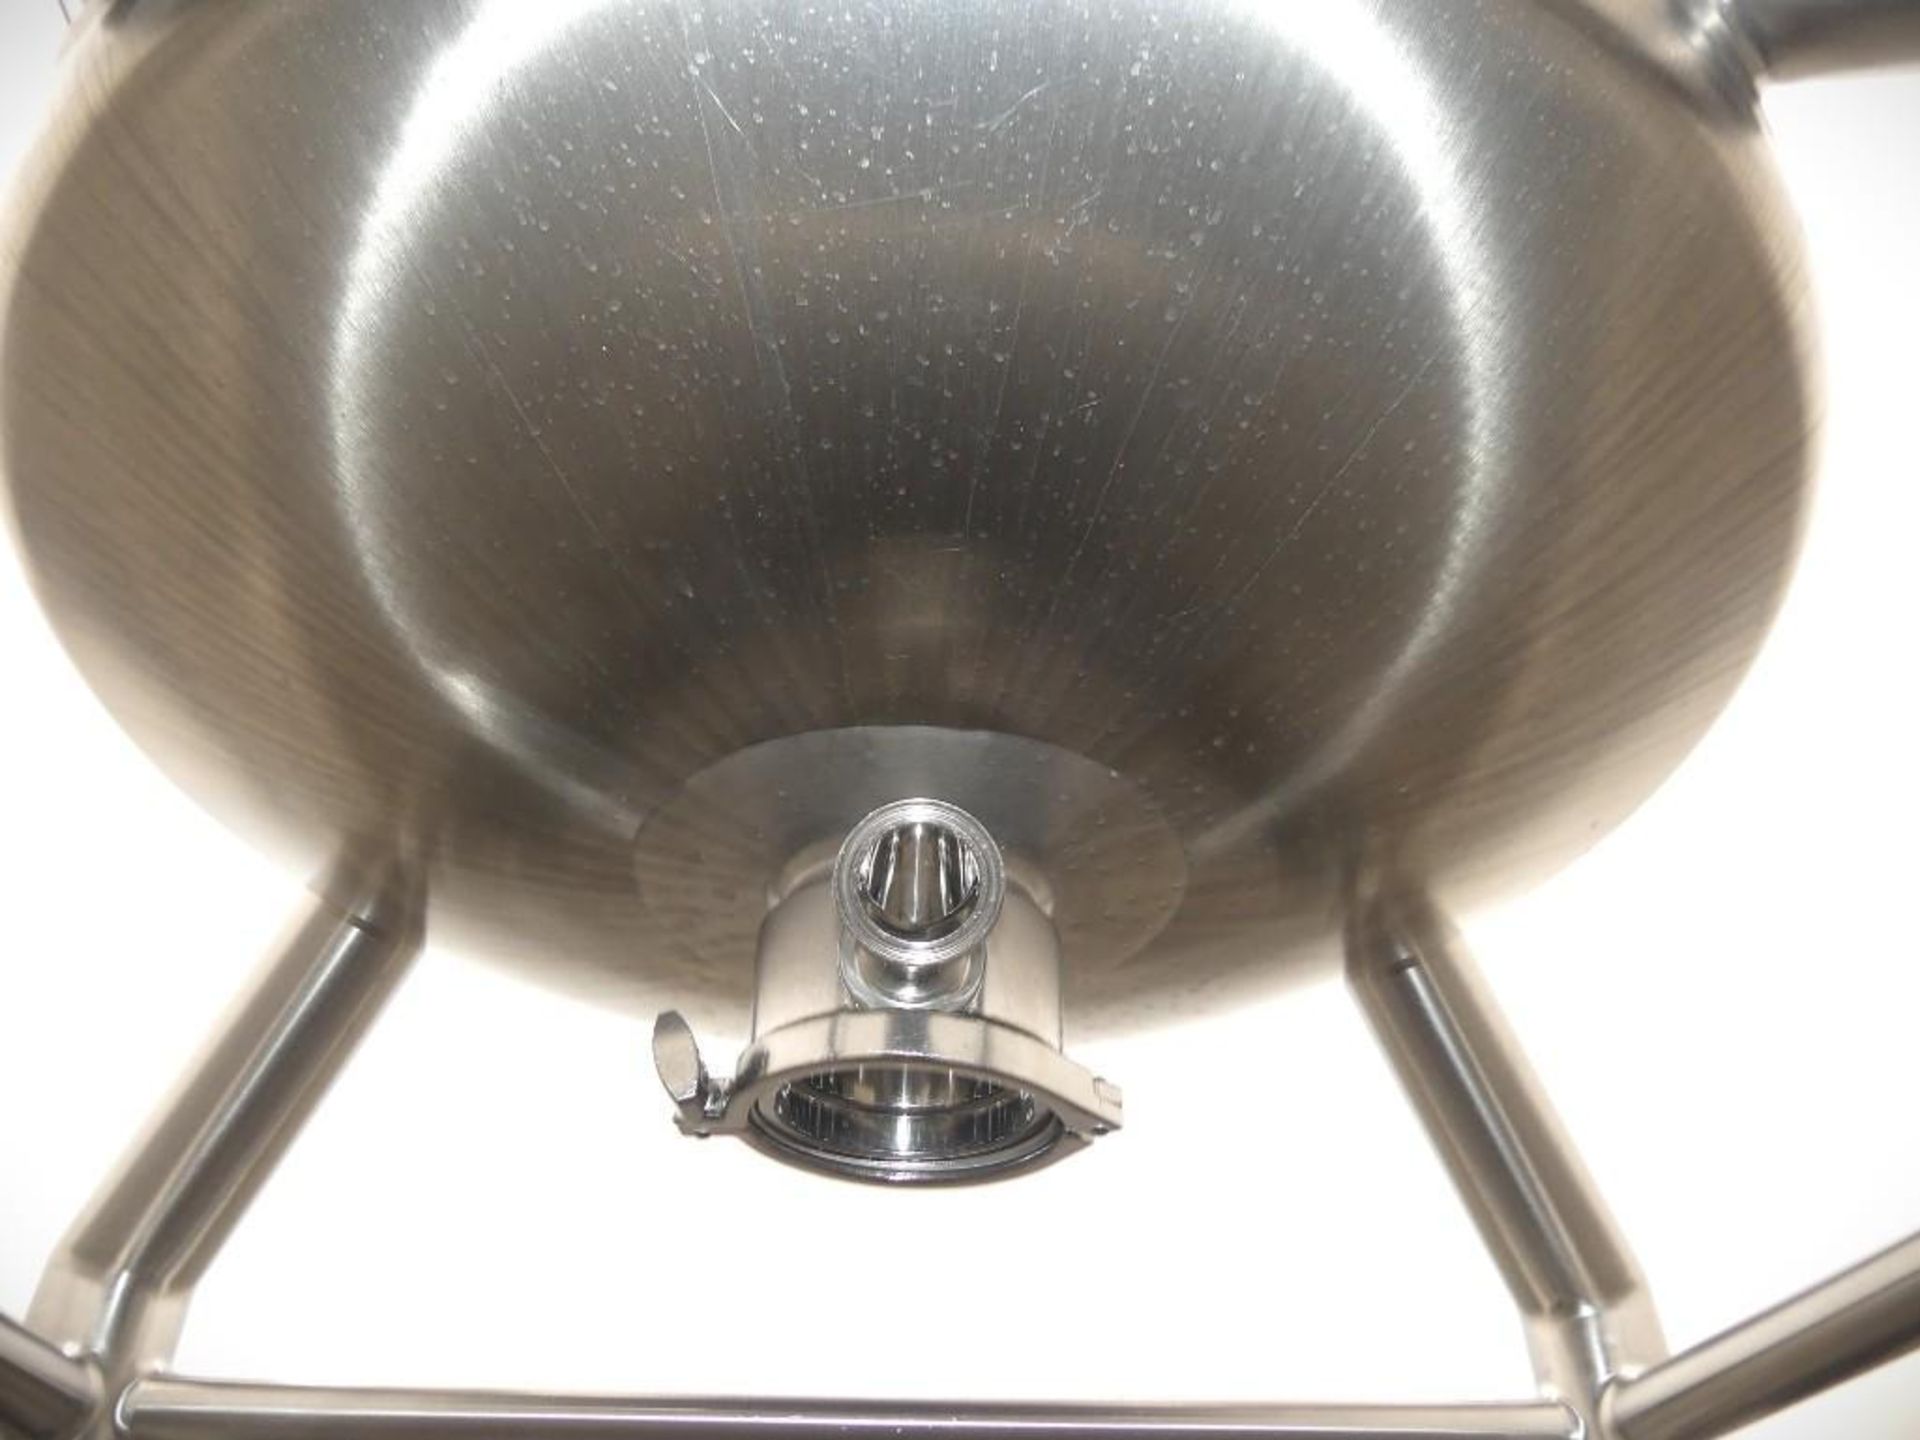 Lee 283 Liter Stainless Steel Agitated Kettle - Image 13 of 21